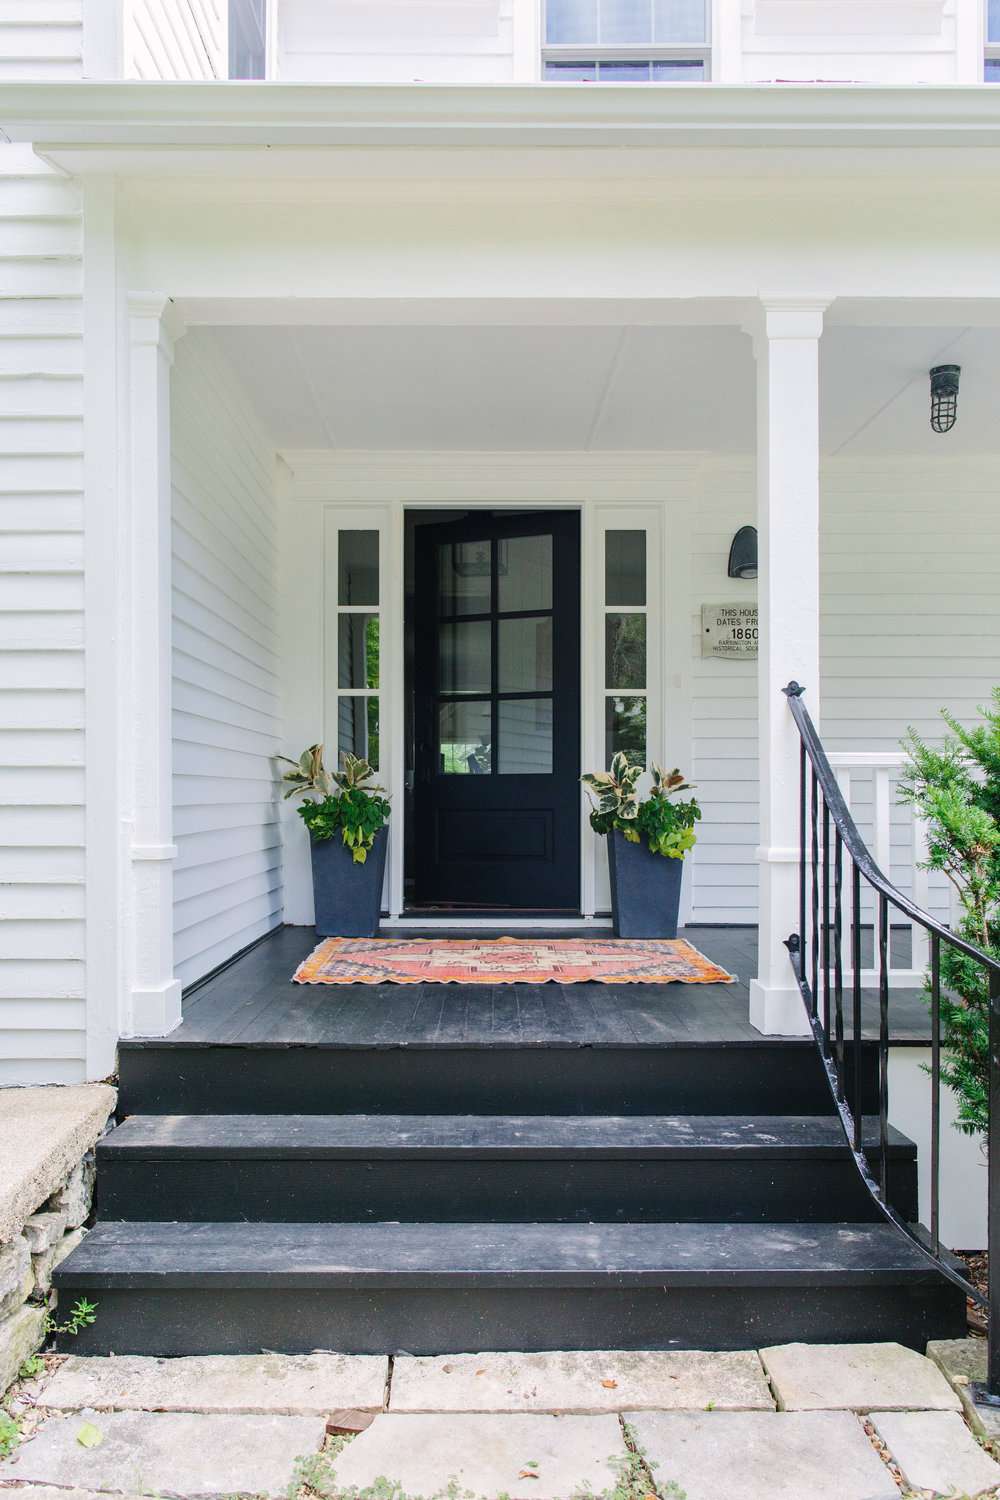 White house with black door and black painted porch and stairs